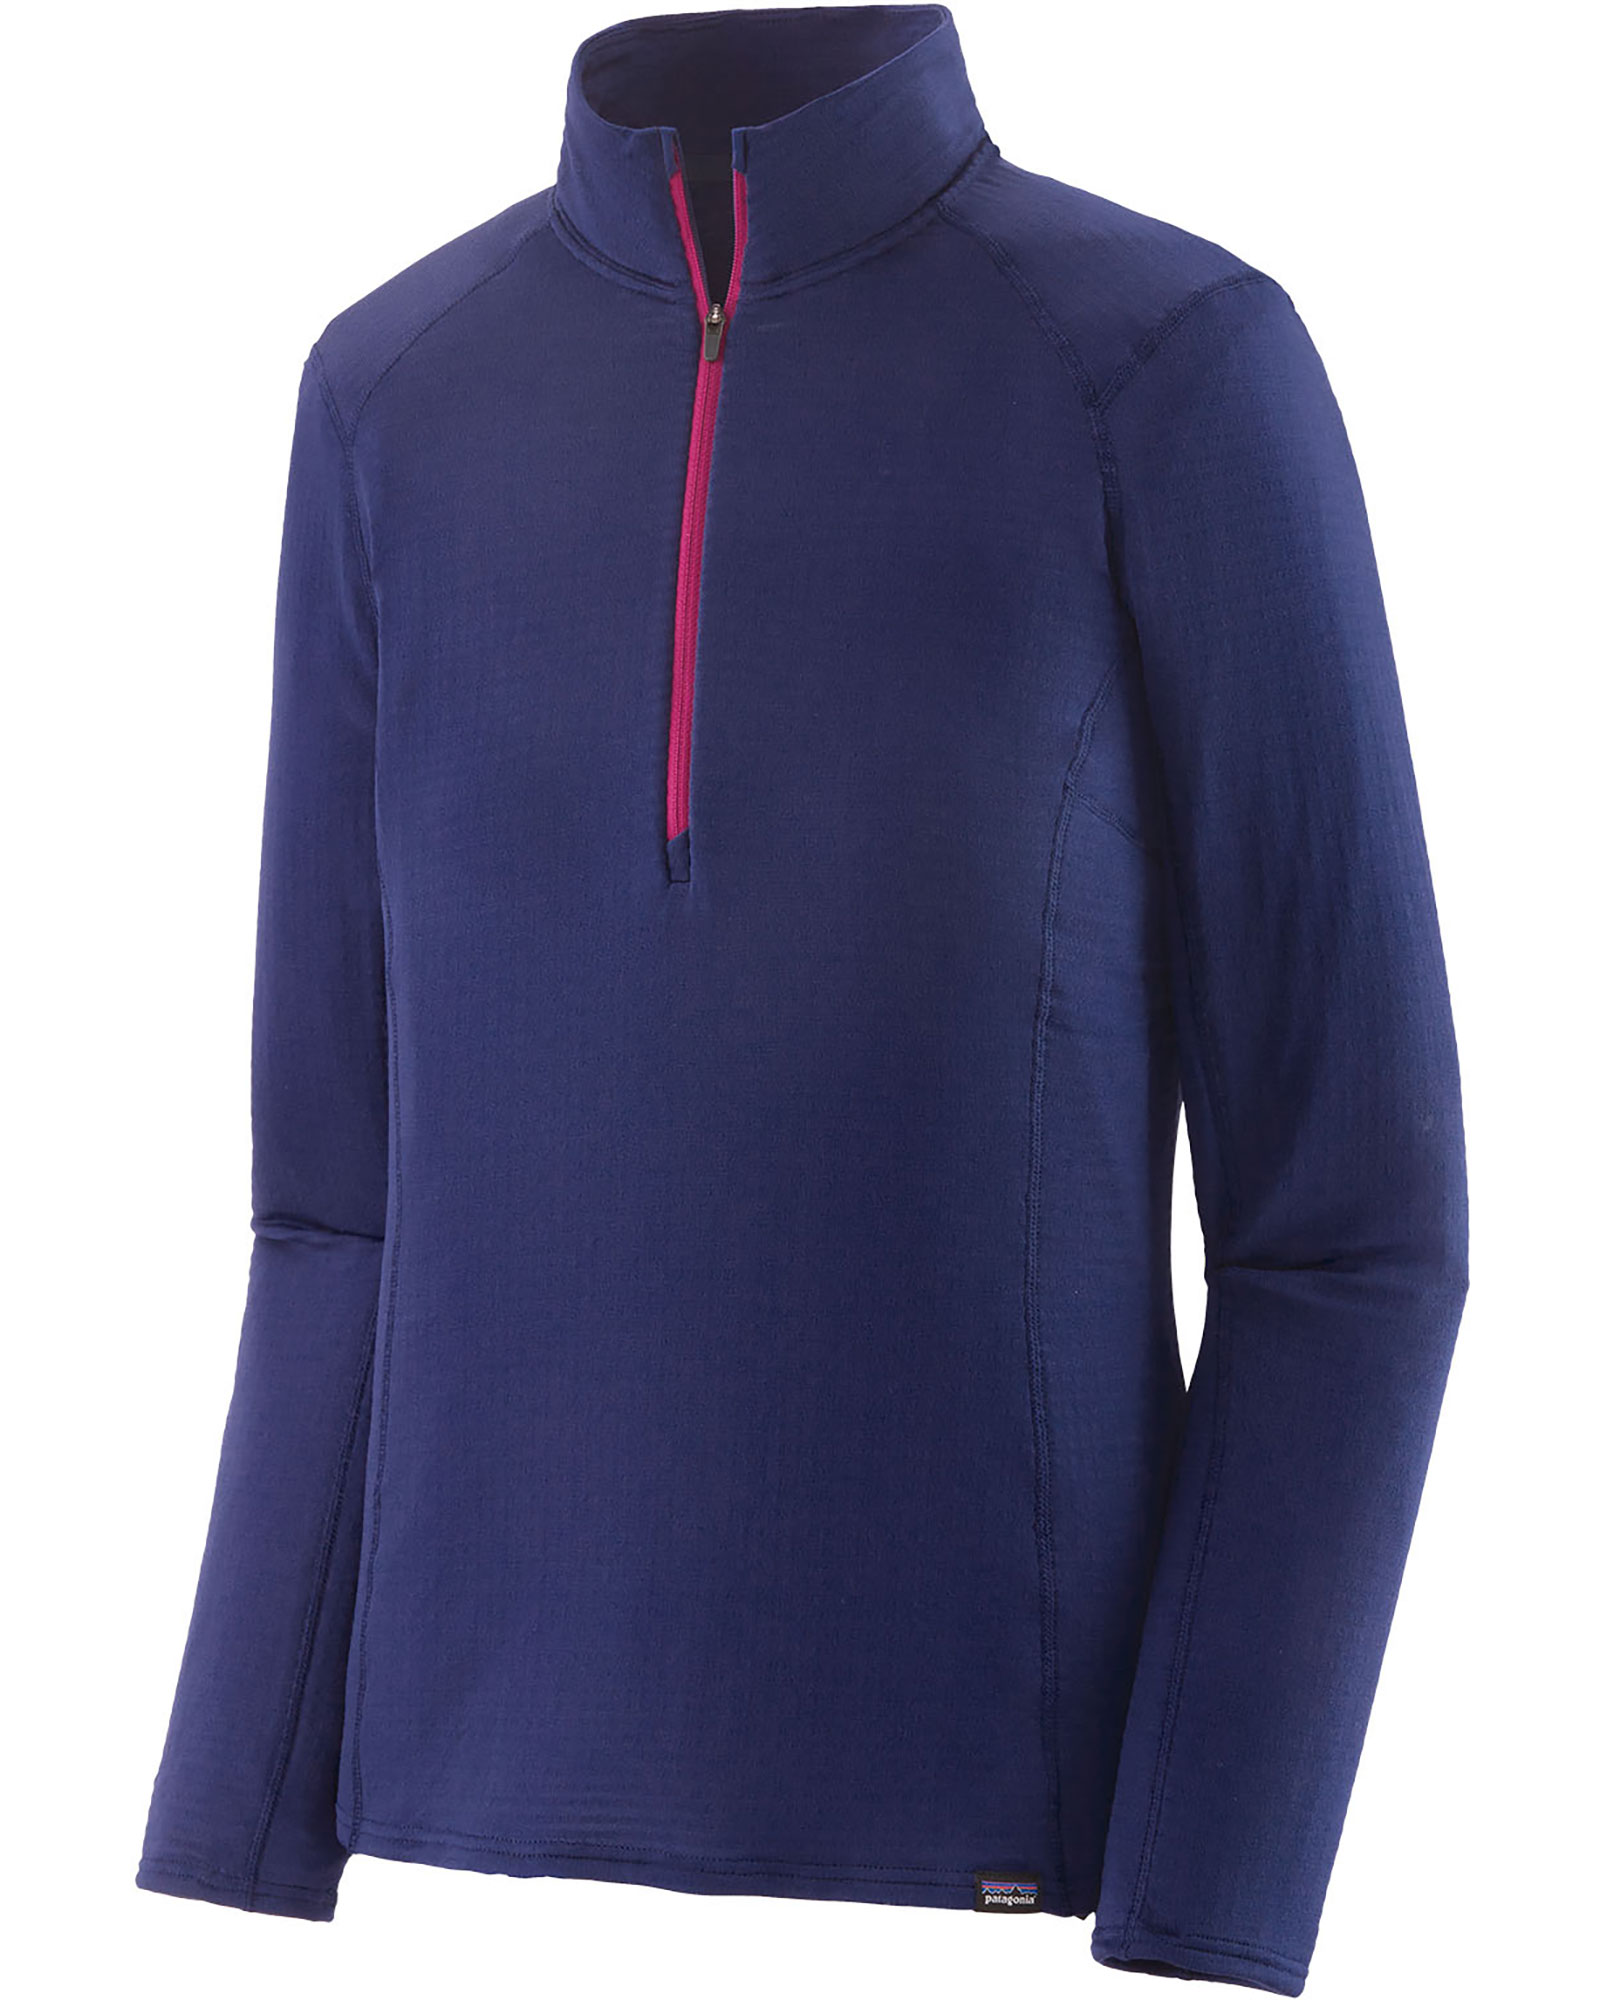 Patagonia Capilene Women’s Thermal Weight Zip Neck - Sound Blue XS